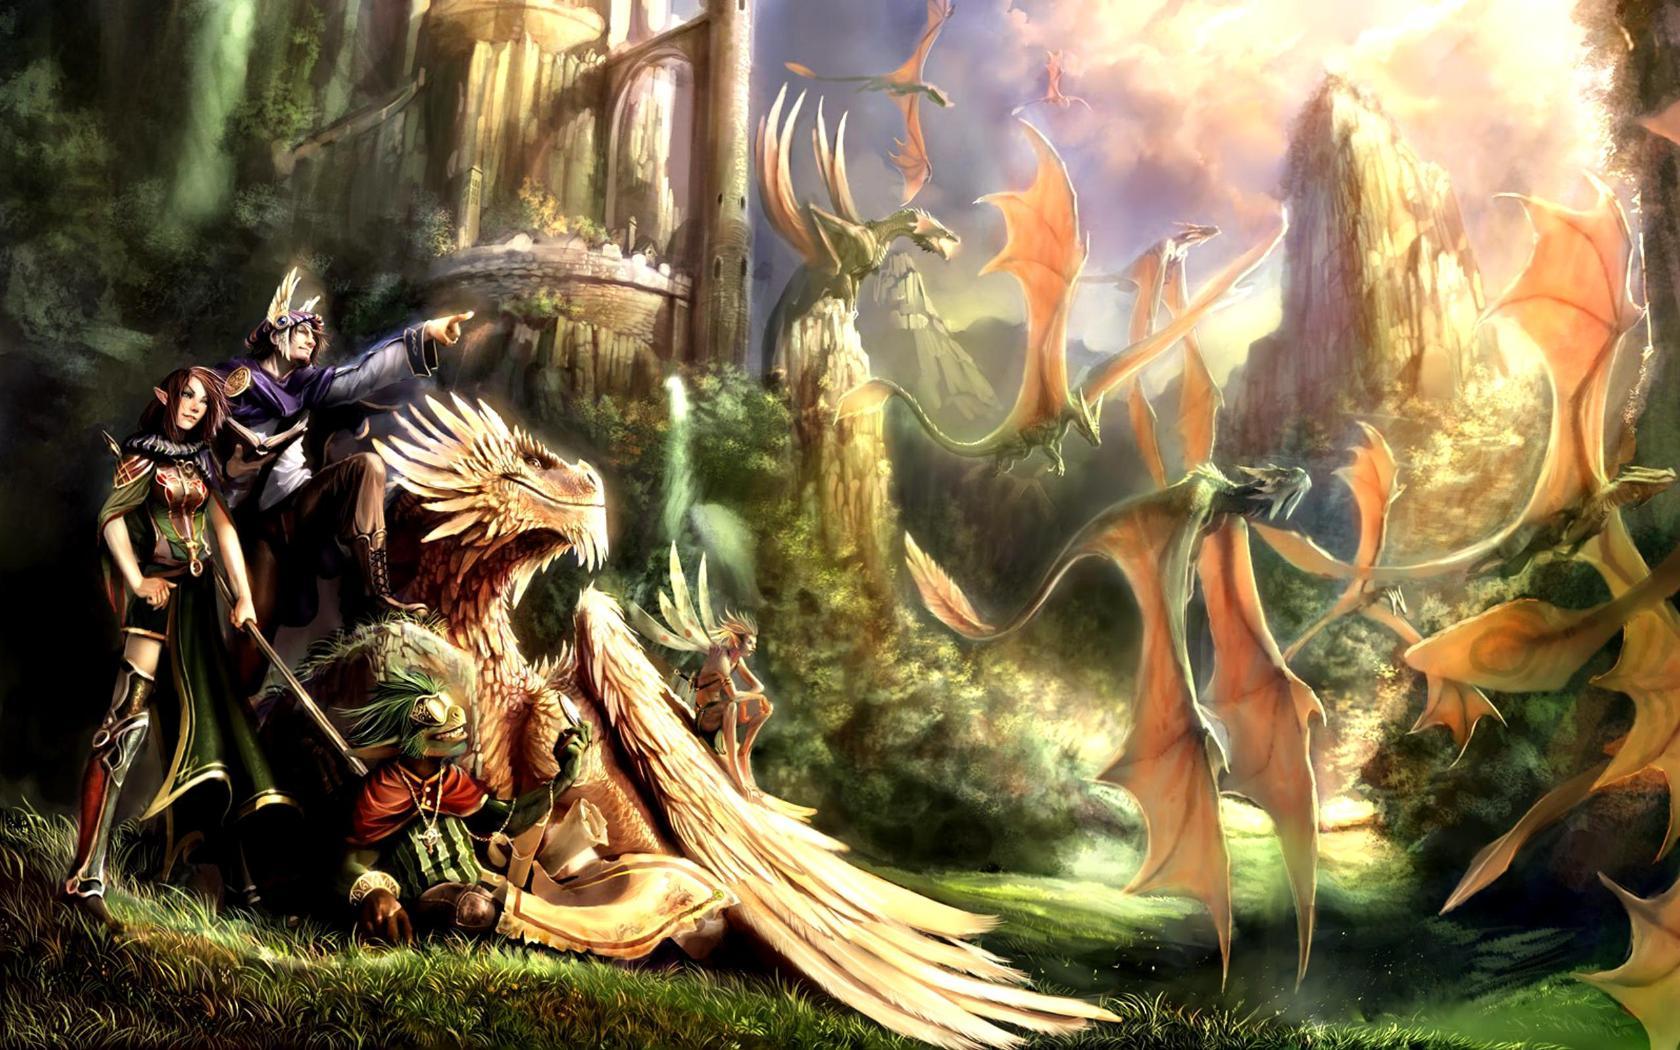 Download the Valley fo Wyverns Wallpaper, Valley fo Wyverns iPhone